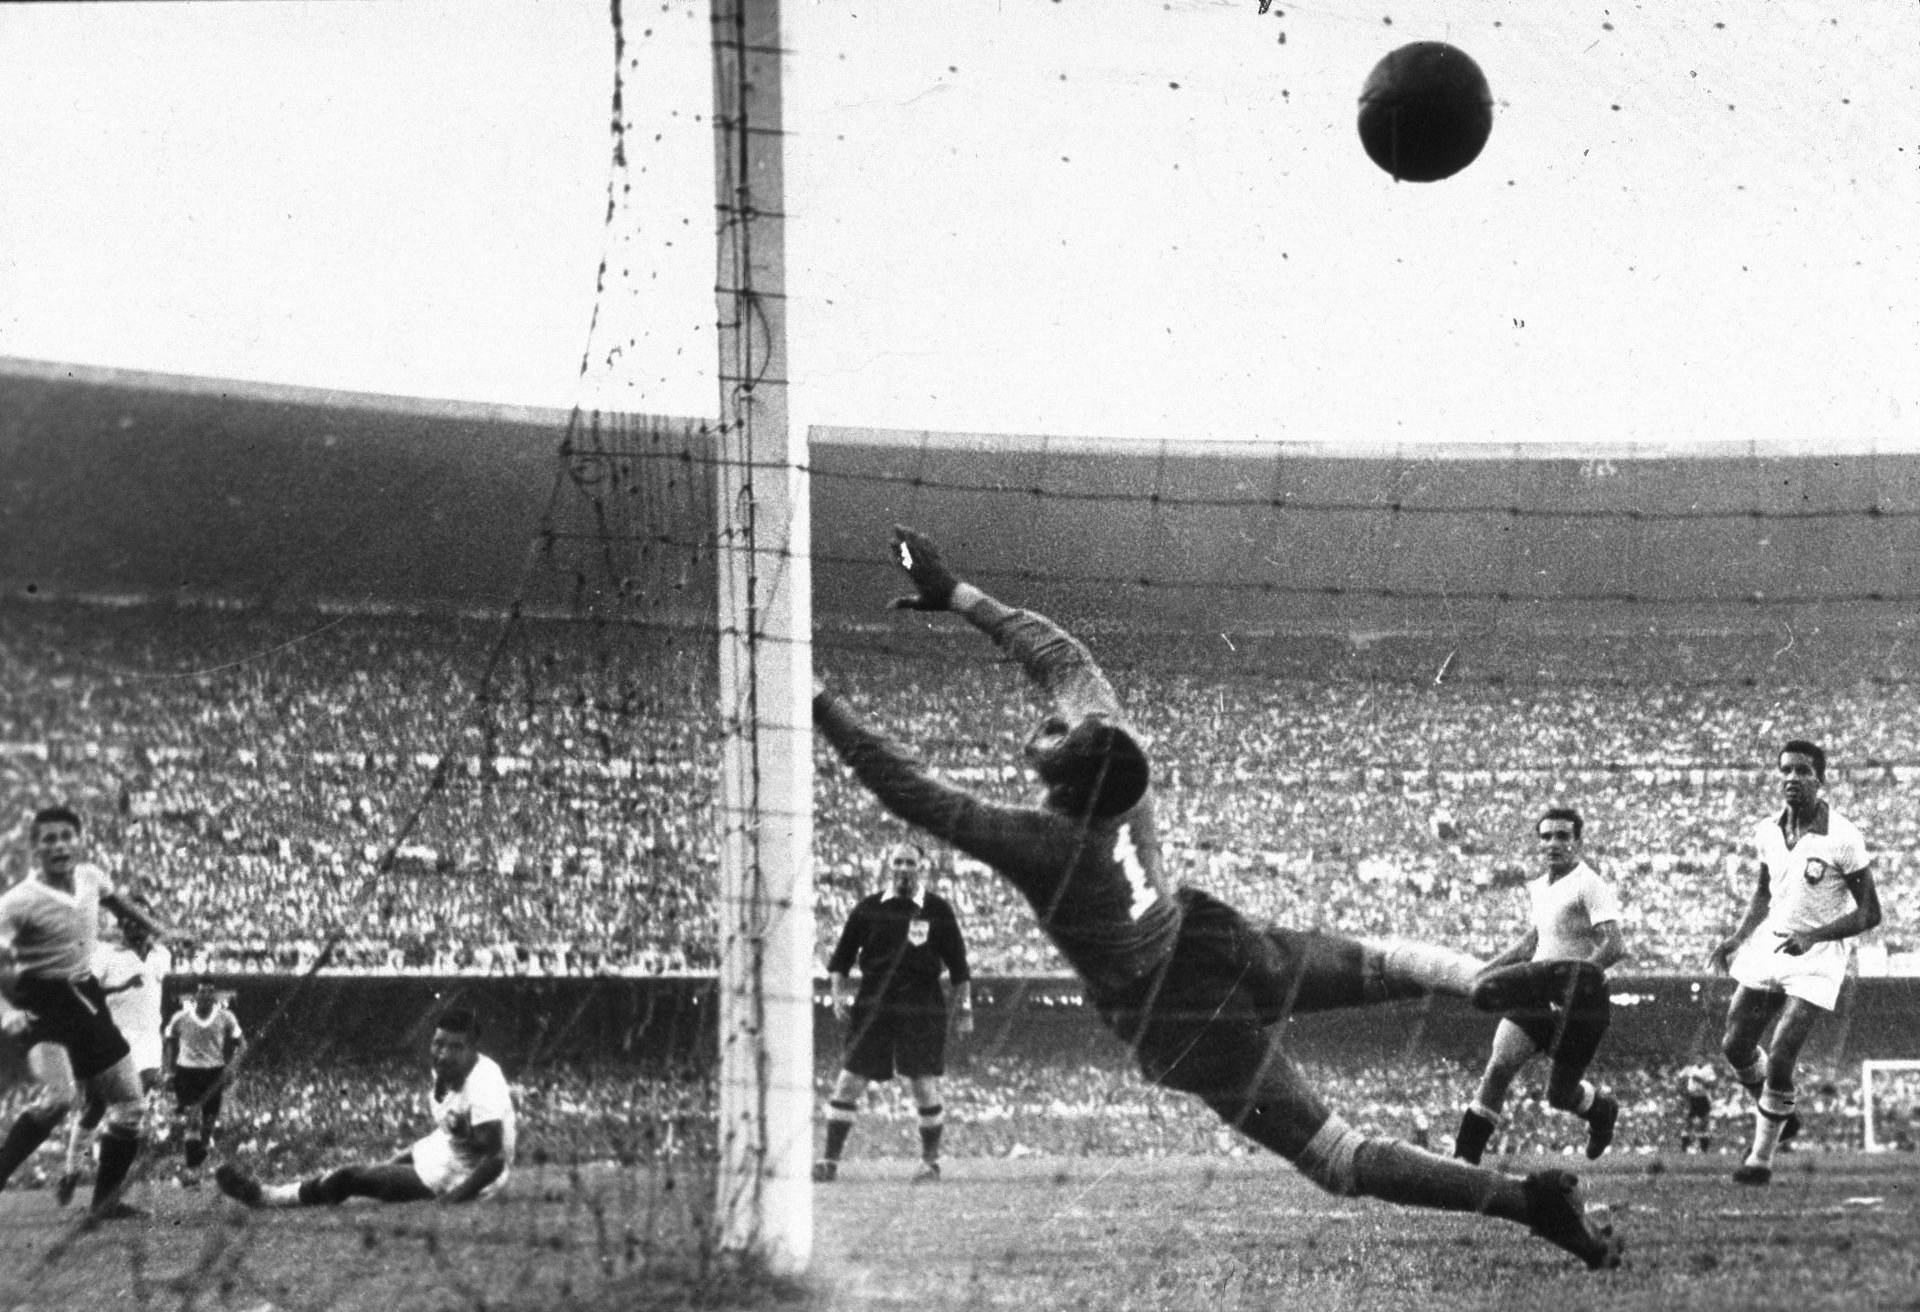 A picture of the Uruguay vs Brazil tie from 1950